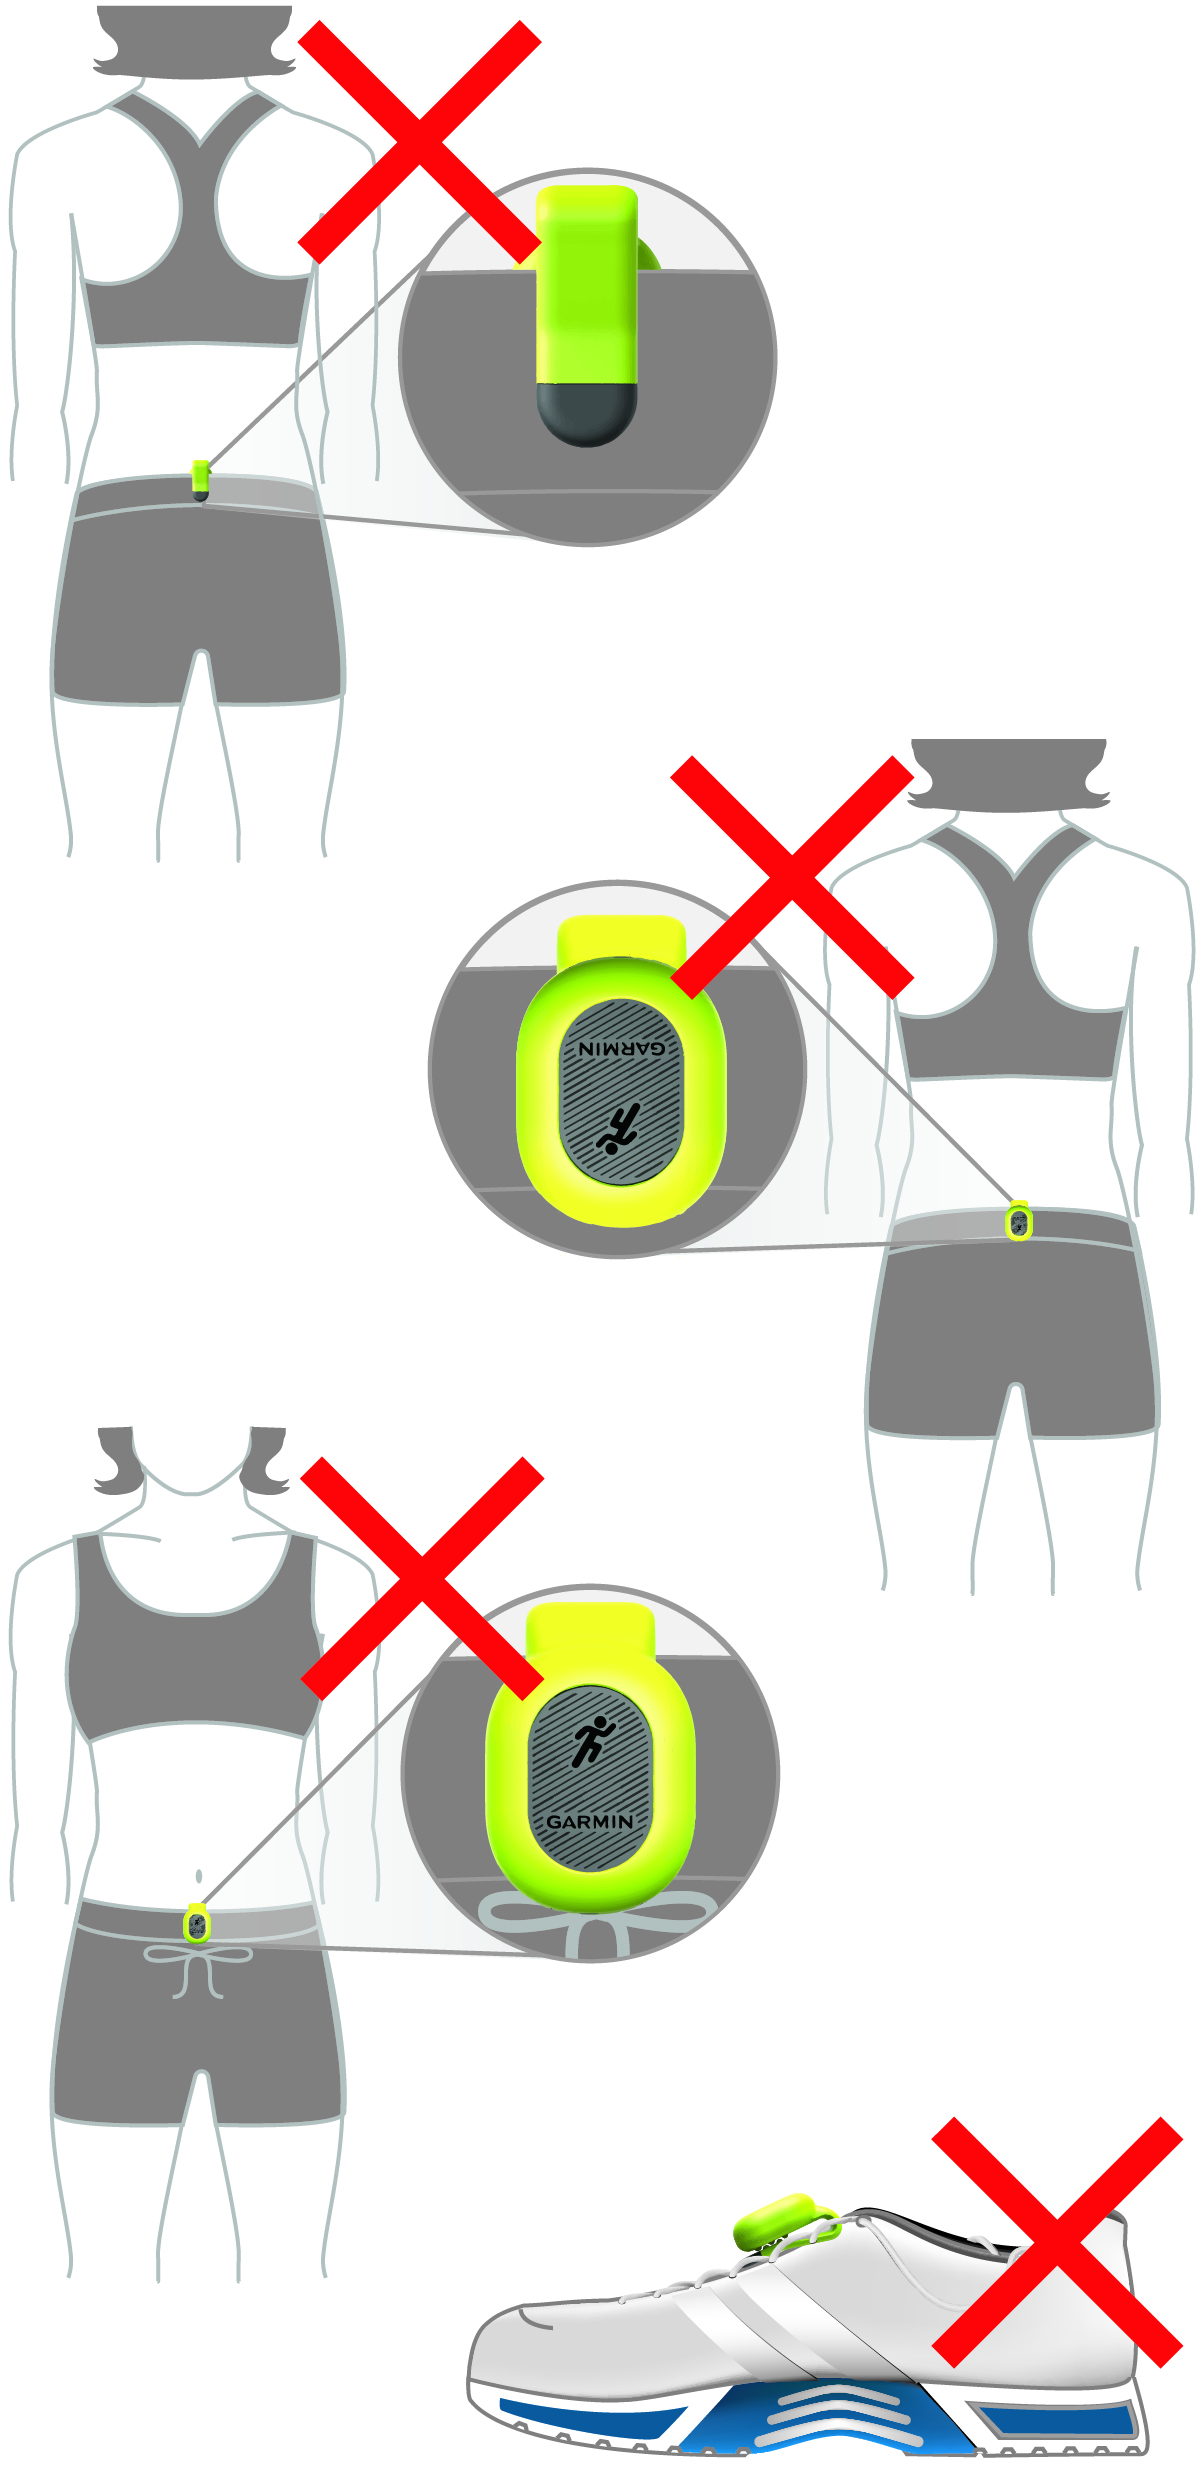 Restrictions for wearing the pod